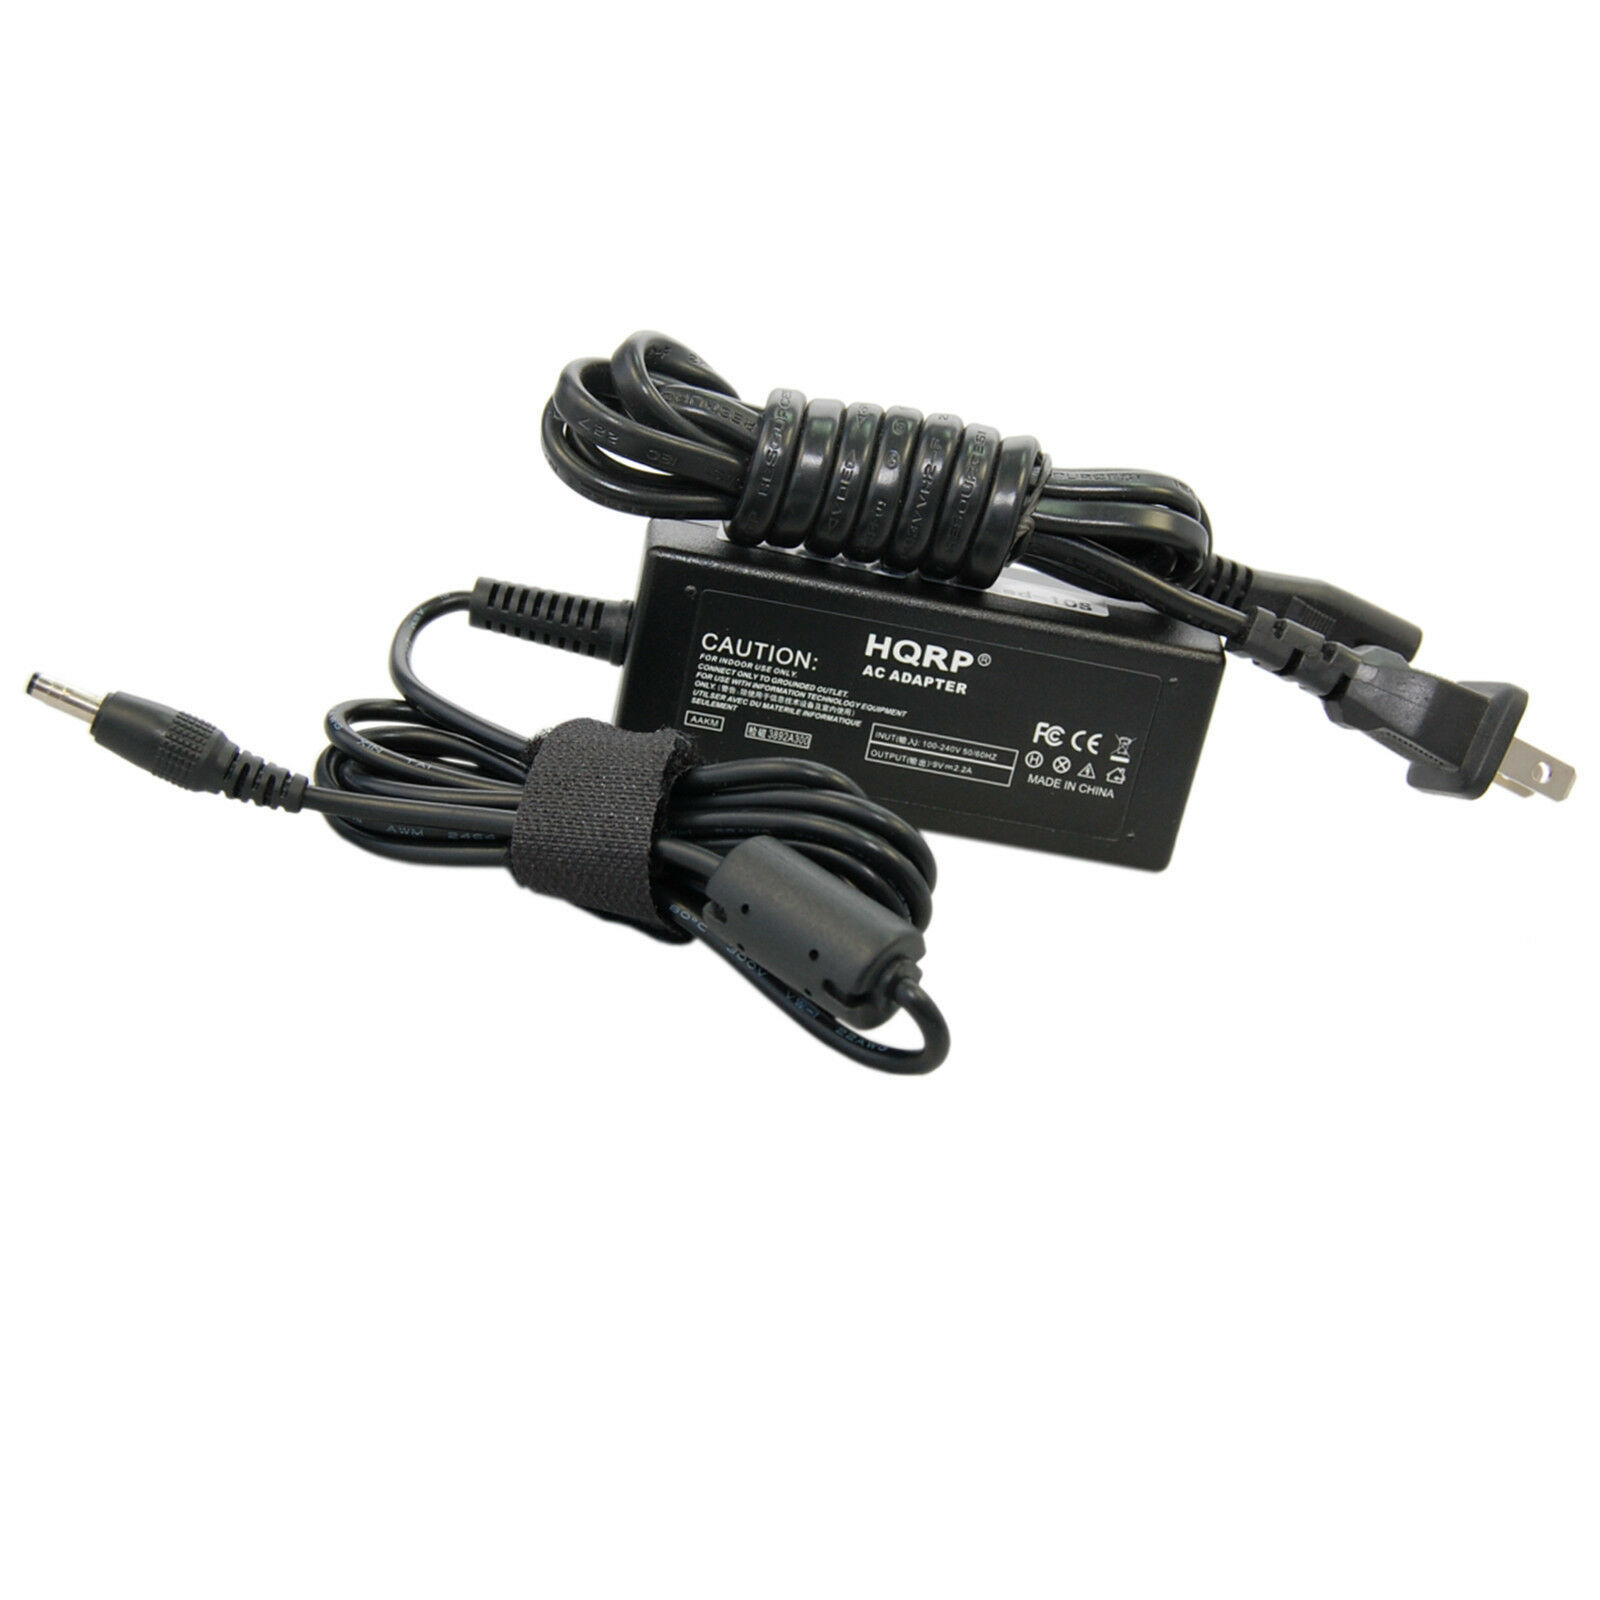 AC DC Adapter For DJI WCH2 CrystalSky/Cendence Battery Charging Hub Power Supply Type: AC/DC Adapter Features: Powe